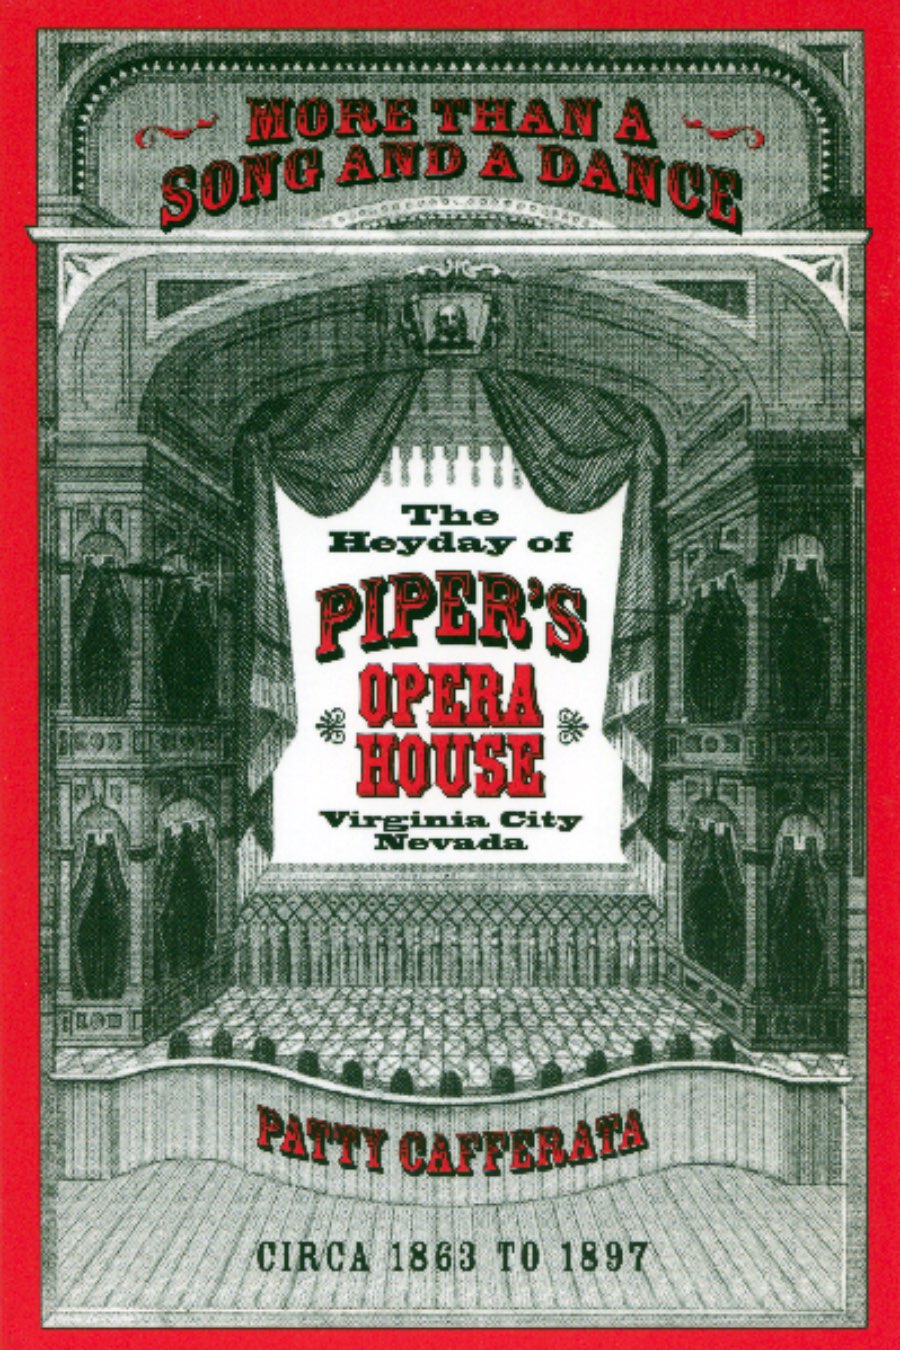 More than a Song and a Dance: The Heyday of Piper's Opera House, Virginia City, Nevada Image